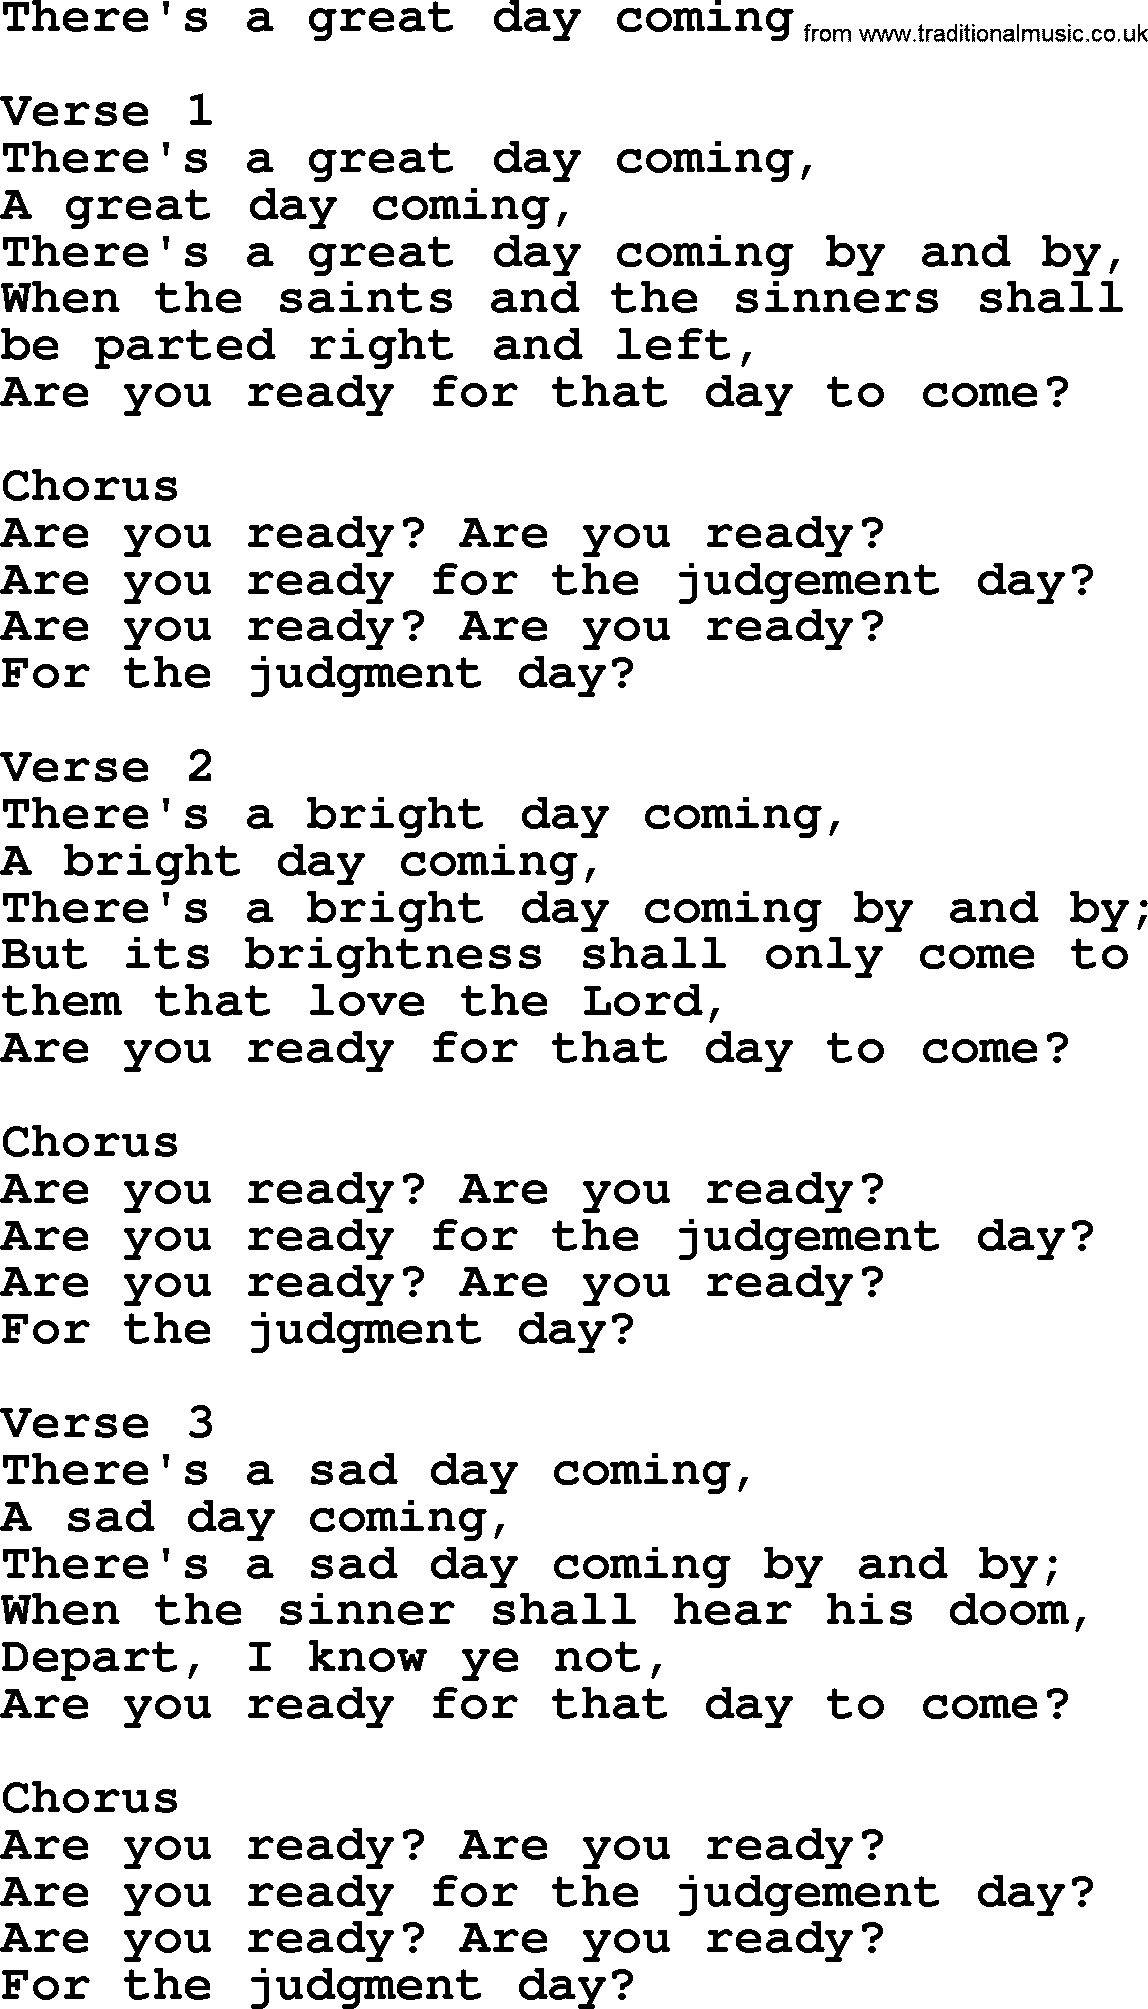 Apostolic and Pentecostal Hymns and Gospel Songs, Hymn: There's A Great Day Coming, Christian lyrics and PDF